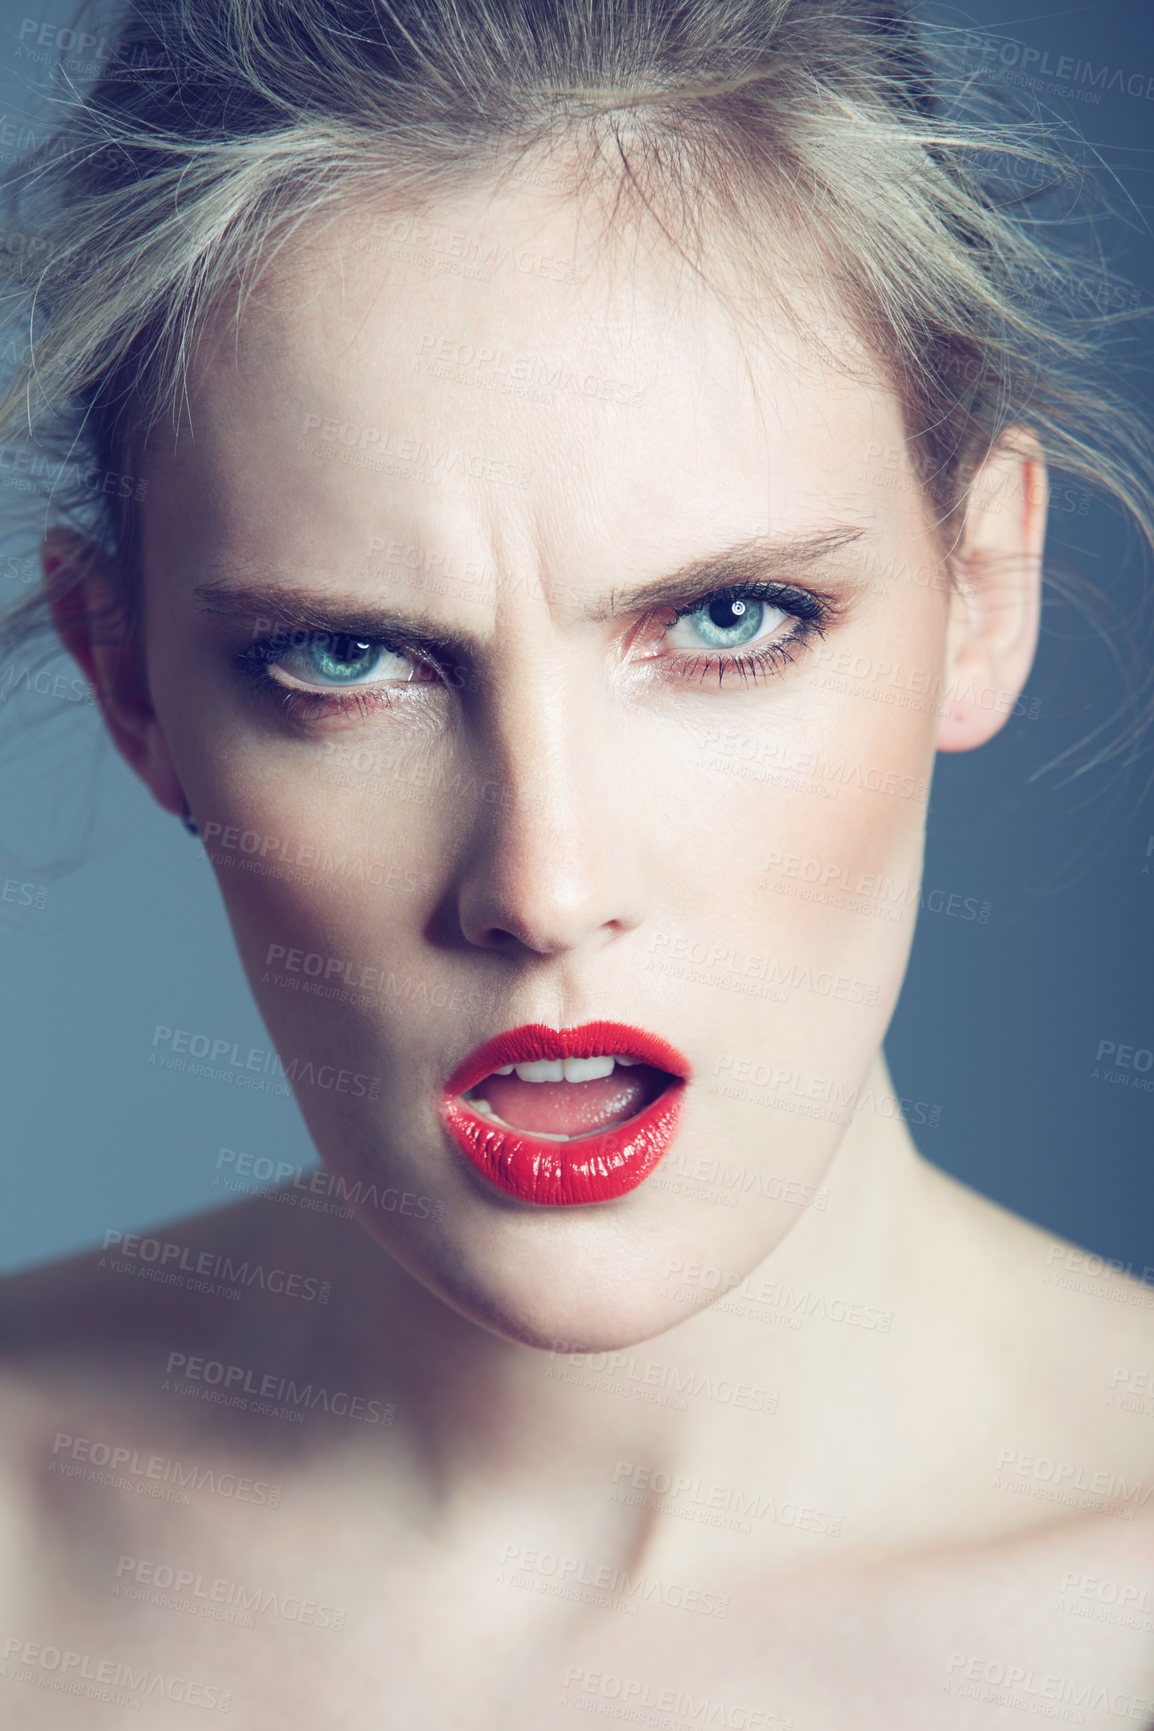 Buy stock photo Studio shot of a beautiful young woman looking angry against a gray background